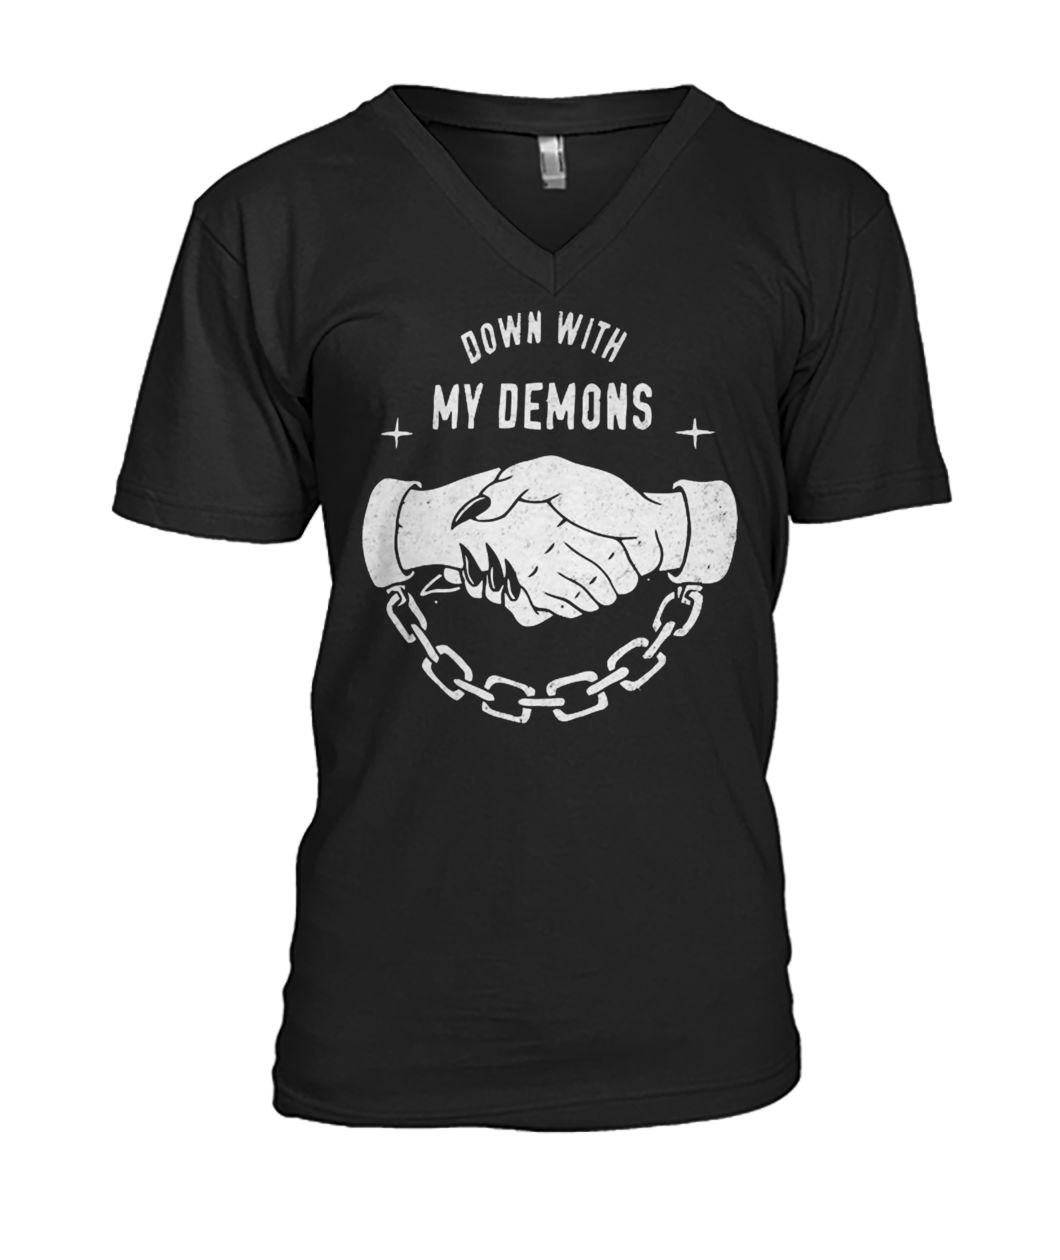 Down with my demons mens v-neck